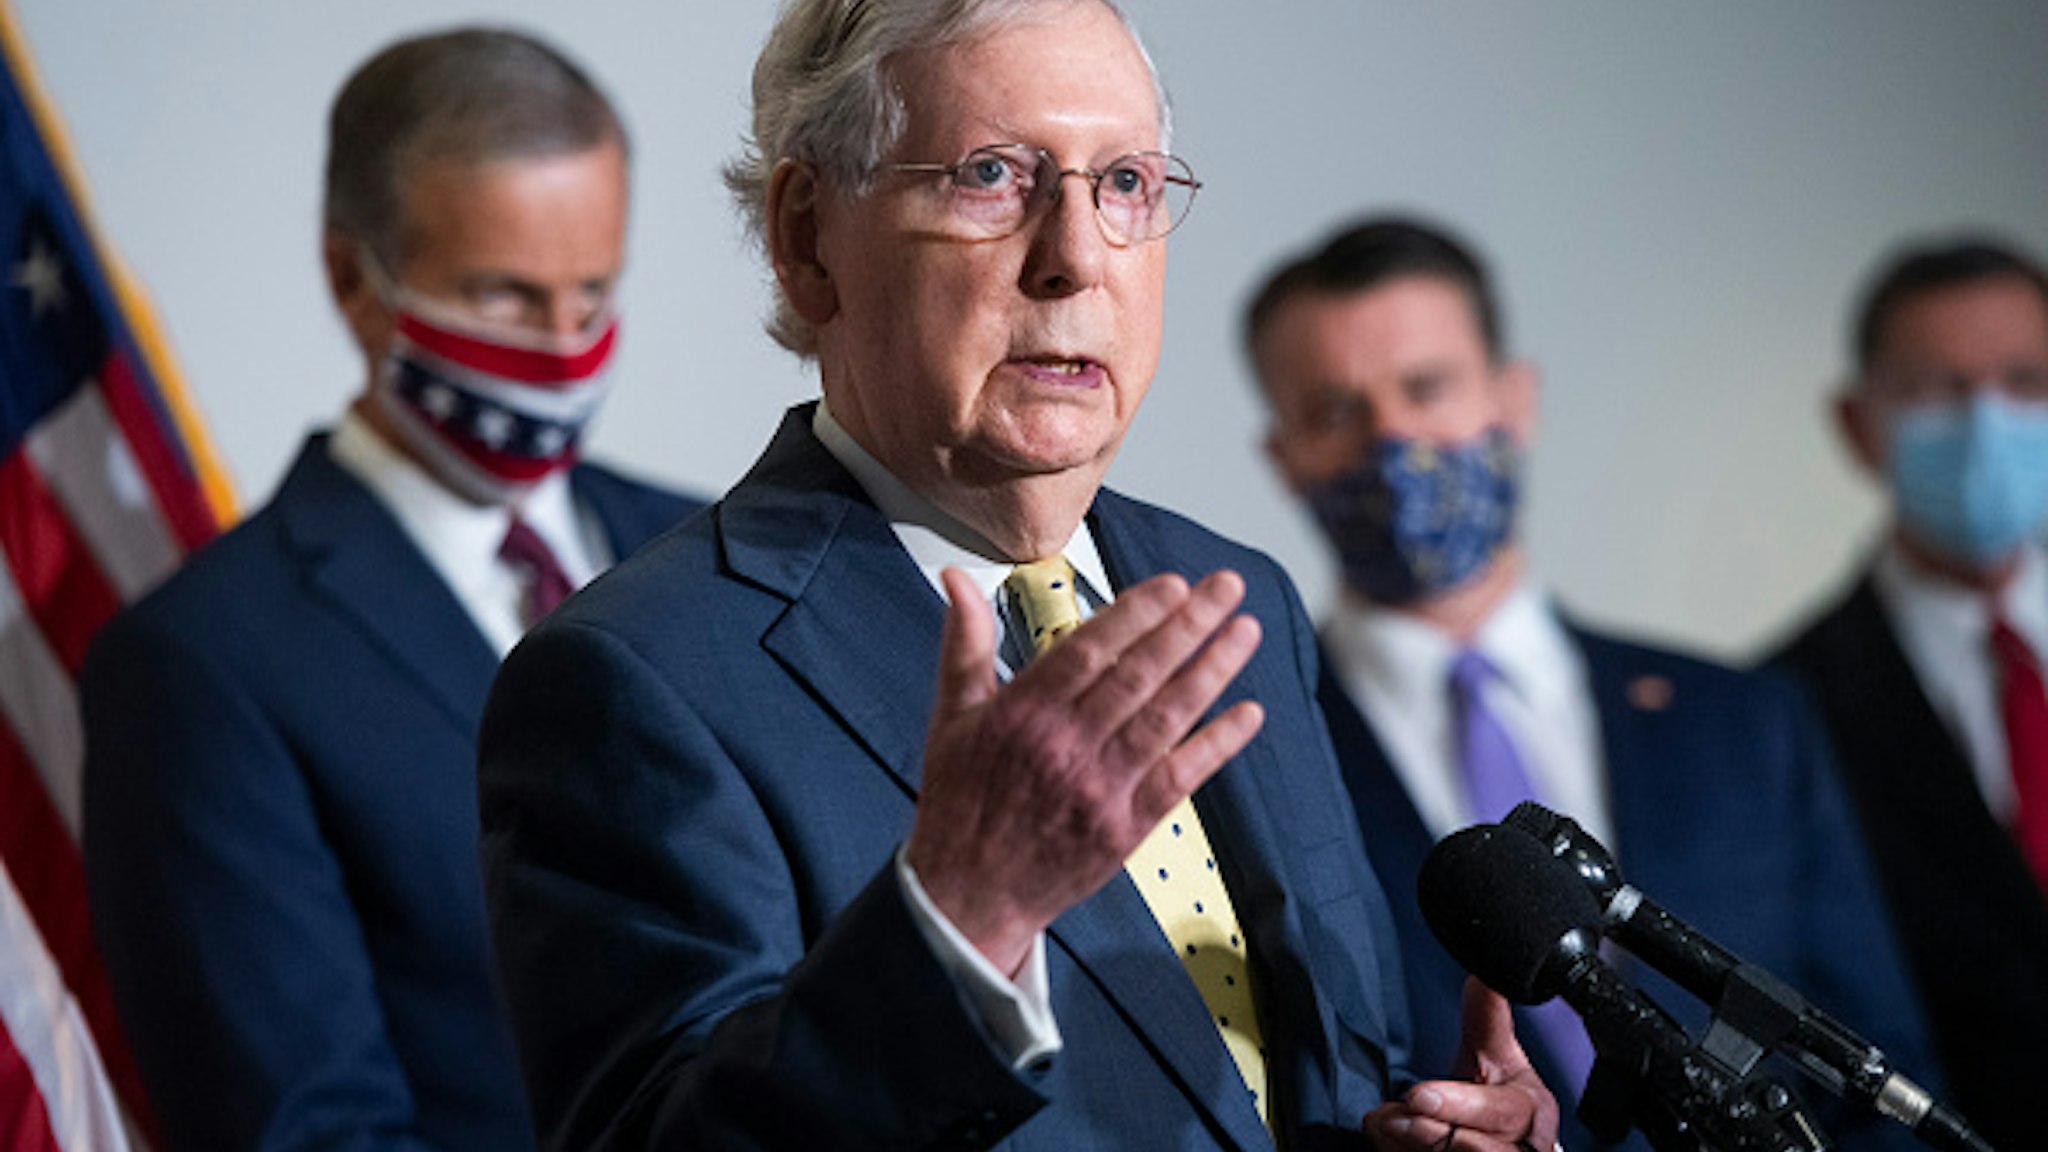 UNITED STATES - SEPTEMBER 9: Senate Majority Leader Mitch McConnell, R-Ky., conducts a news conference after the Senate Republican Policy luncheon in Hart Building on Wednesday, September 9, 2020. Also appearing from left are, Sens. John Thune, R-S.D., Todd Young, R-Ind., and John Barrasso, R-Wyo.